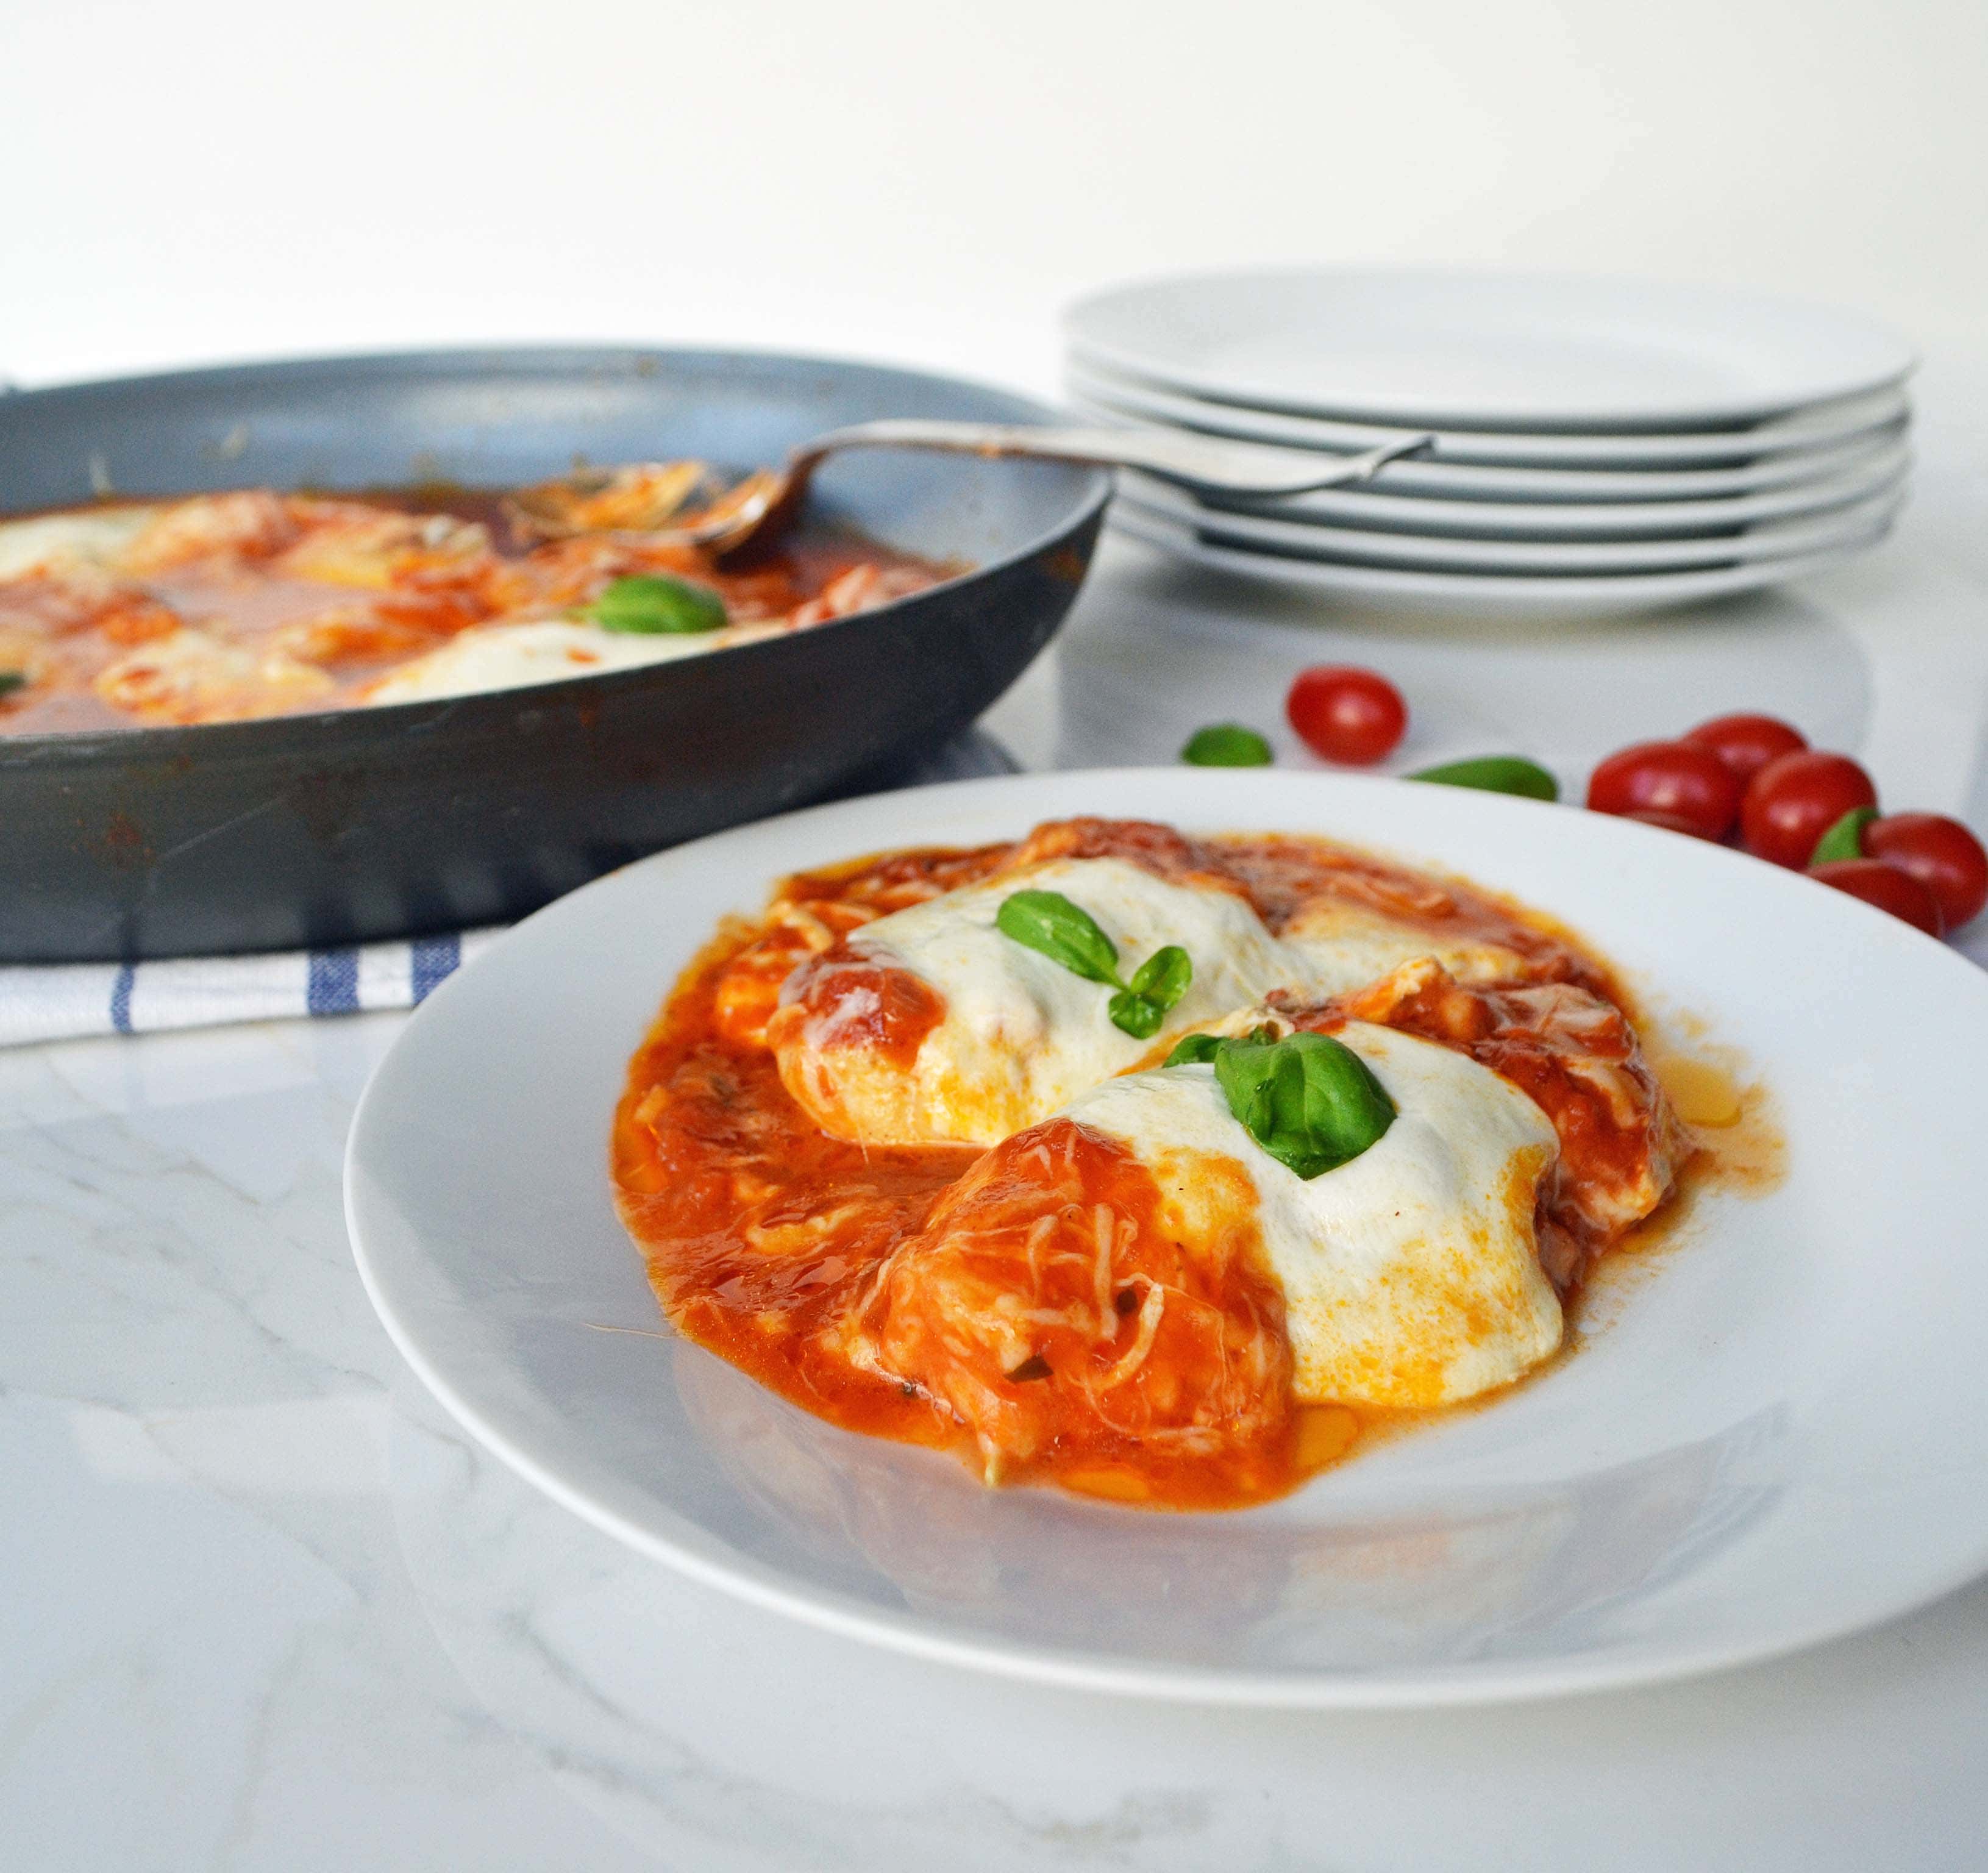 Skinny Sister Chicken Parmesan. Less calories and gluten free version of the popular Chicken Parmesan.